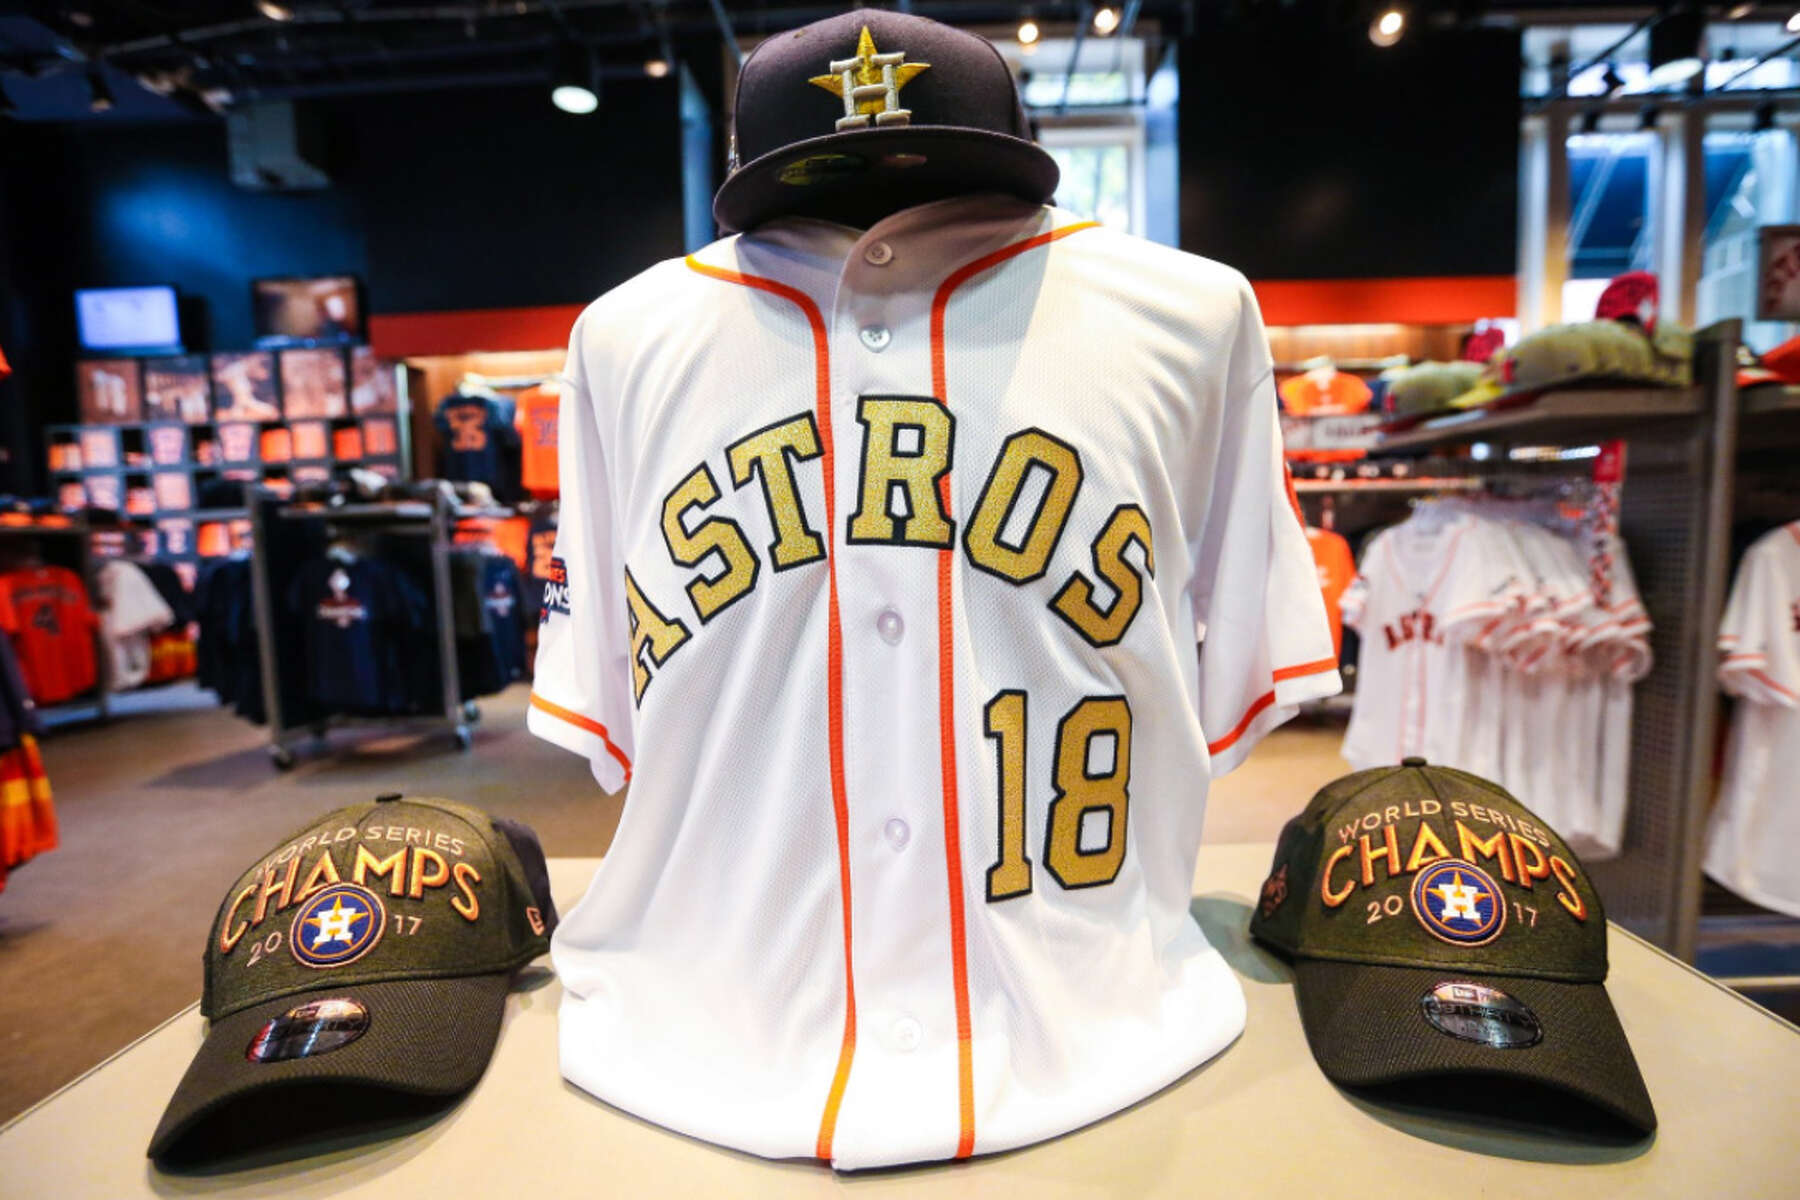 astros blue and gold jersey